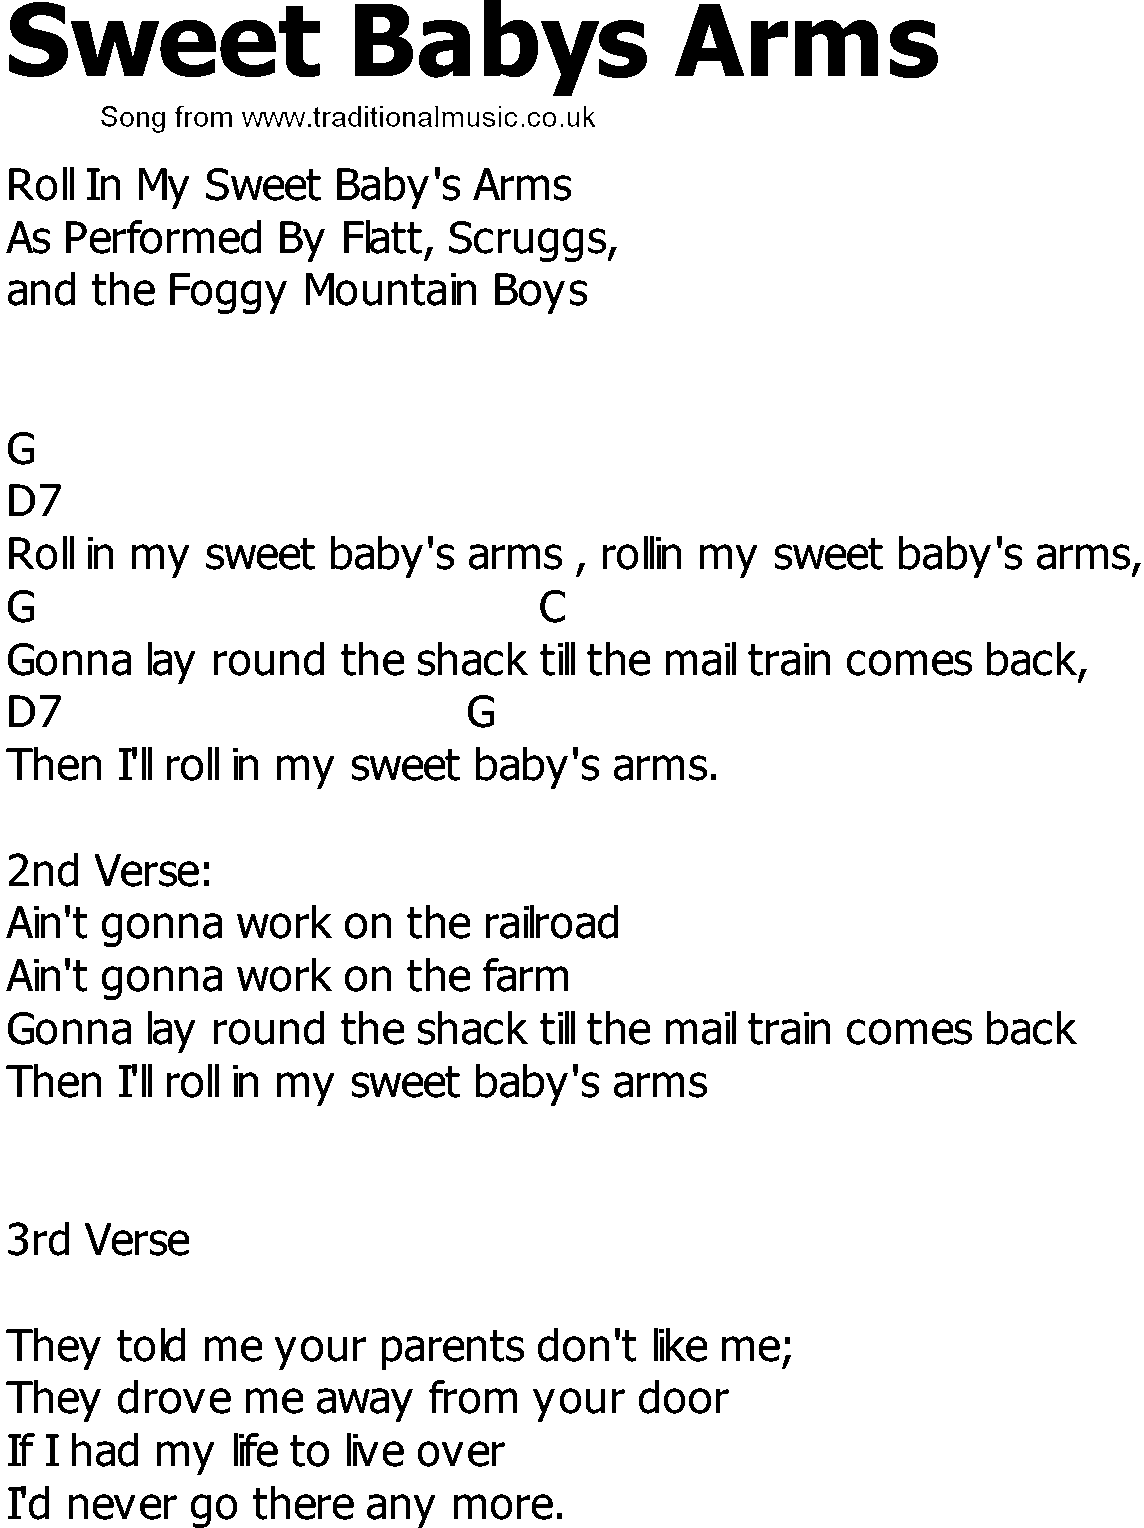 Old Country song lyrics with chords - Sweet Babys Arms